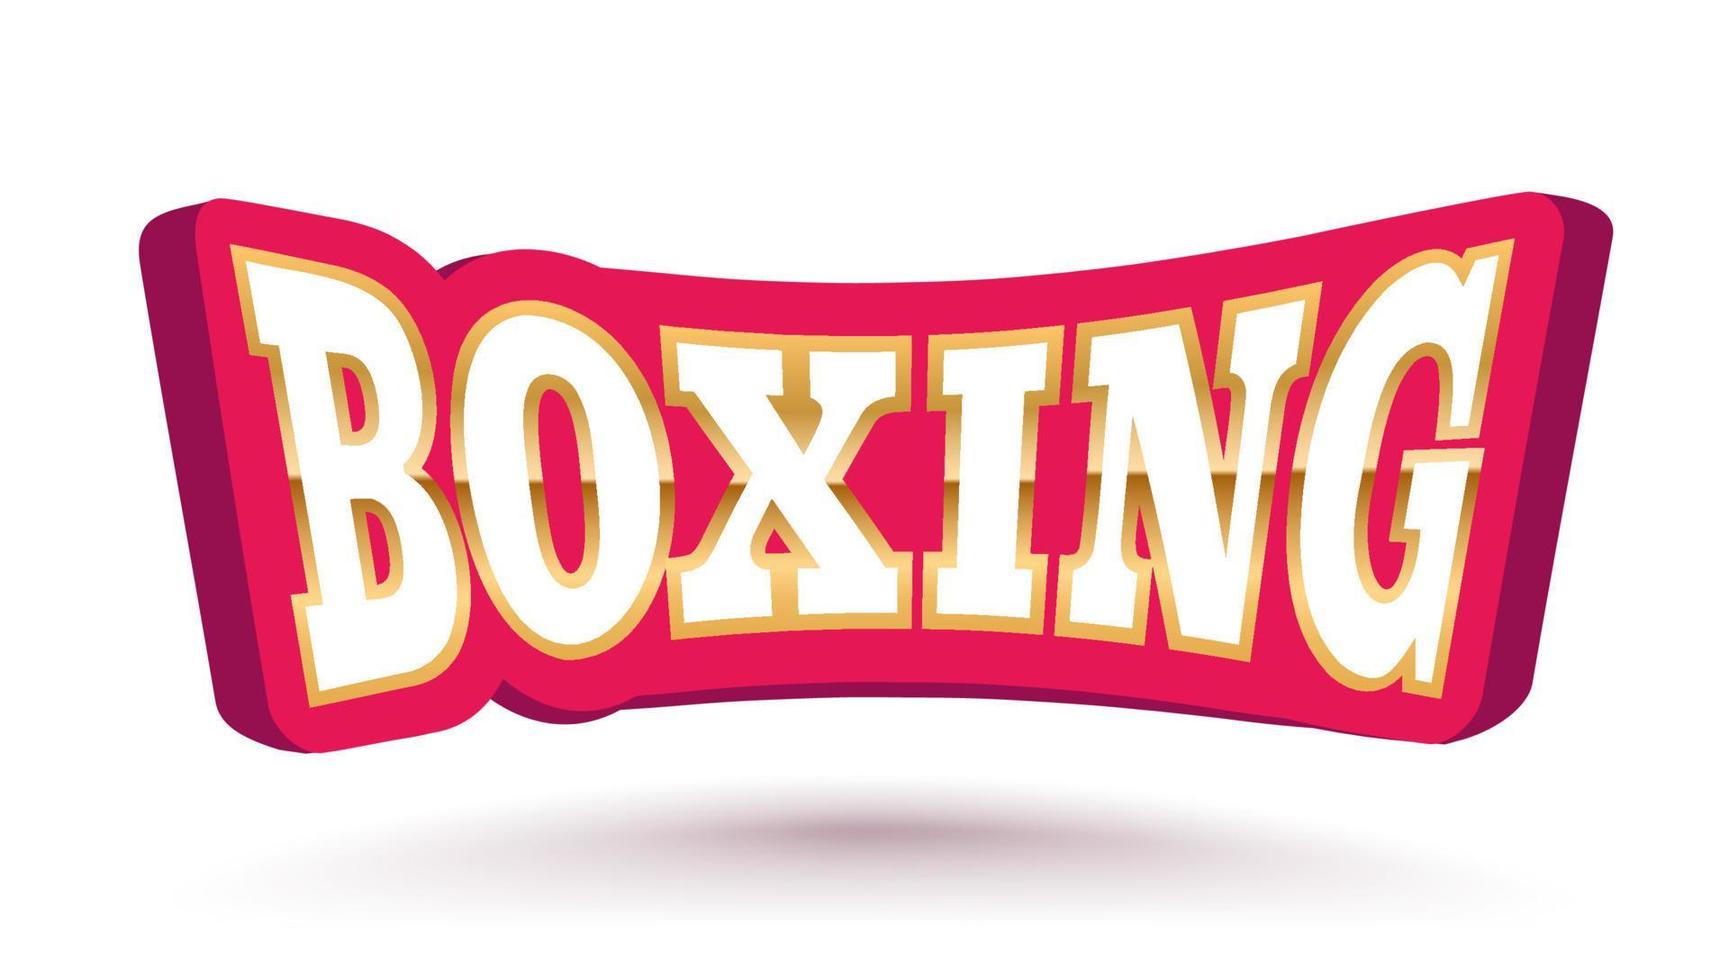 Vector vintage emblem for boxing. Vector logo for boxing club with stars.